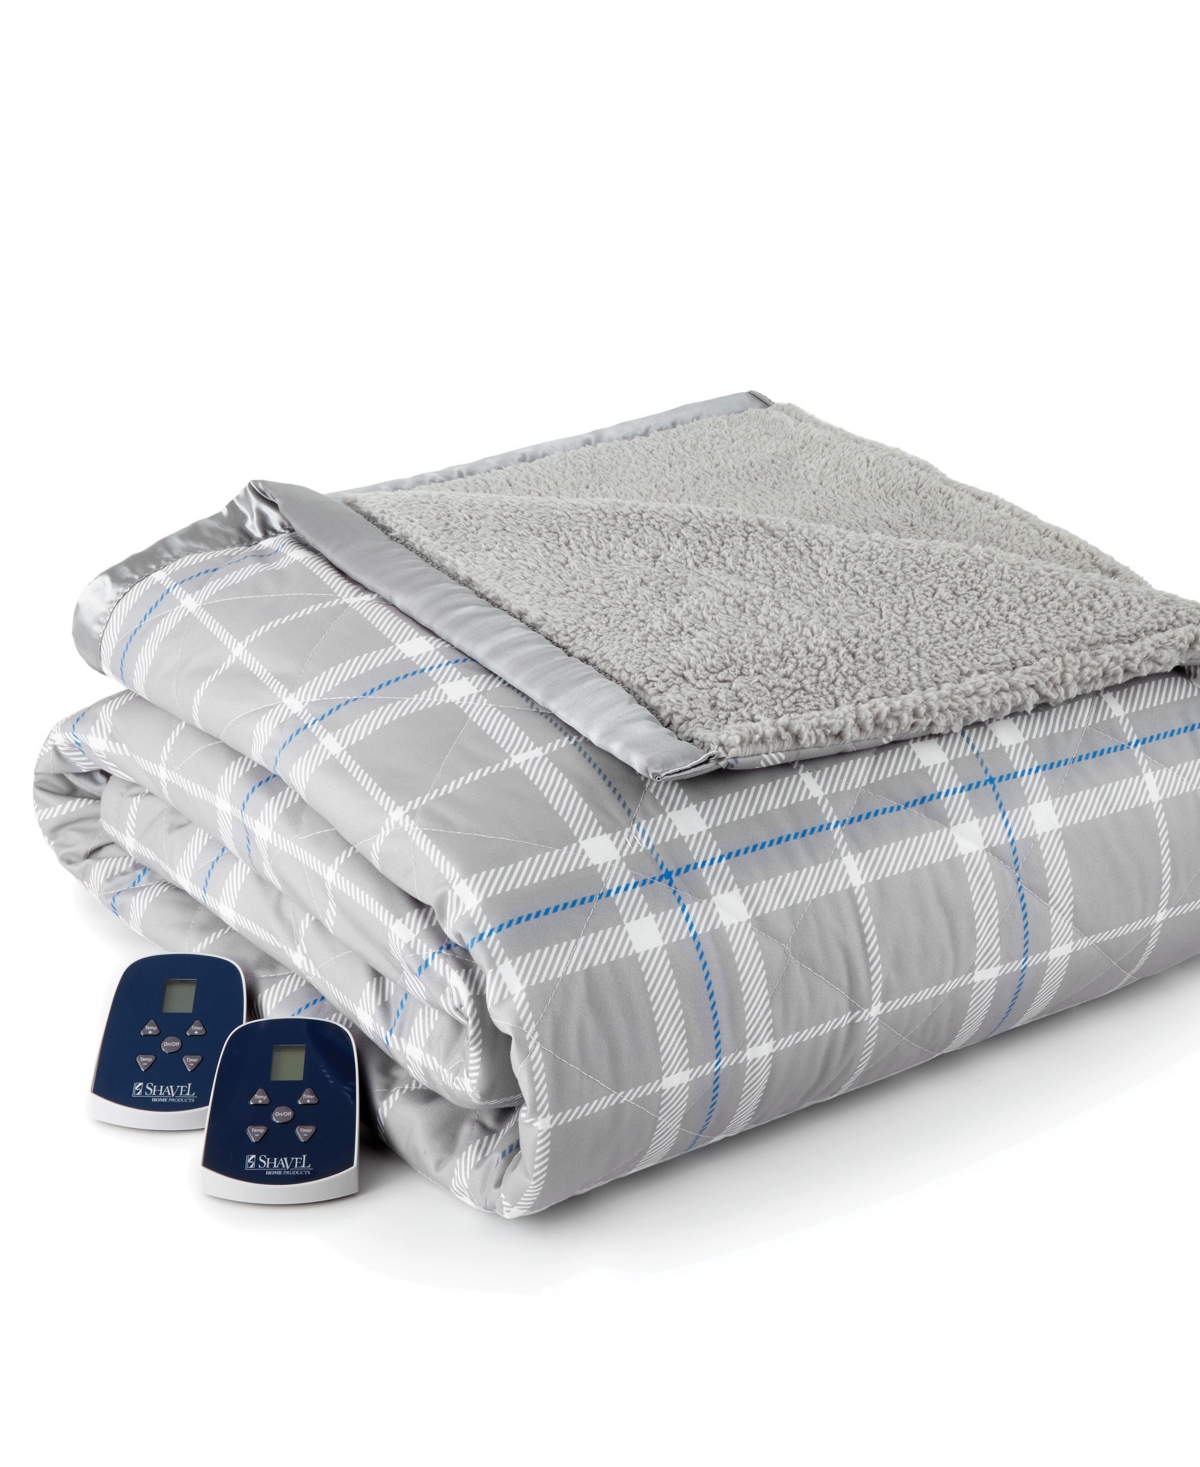 Shavel Reversible Micro Flannel To Sherpa Queen Electric Blanket In Carlton Plaid Gray